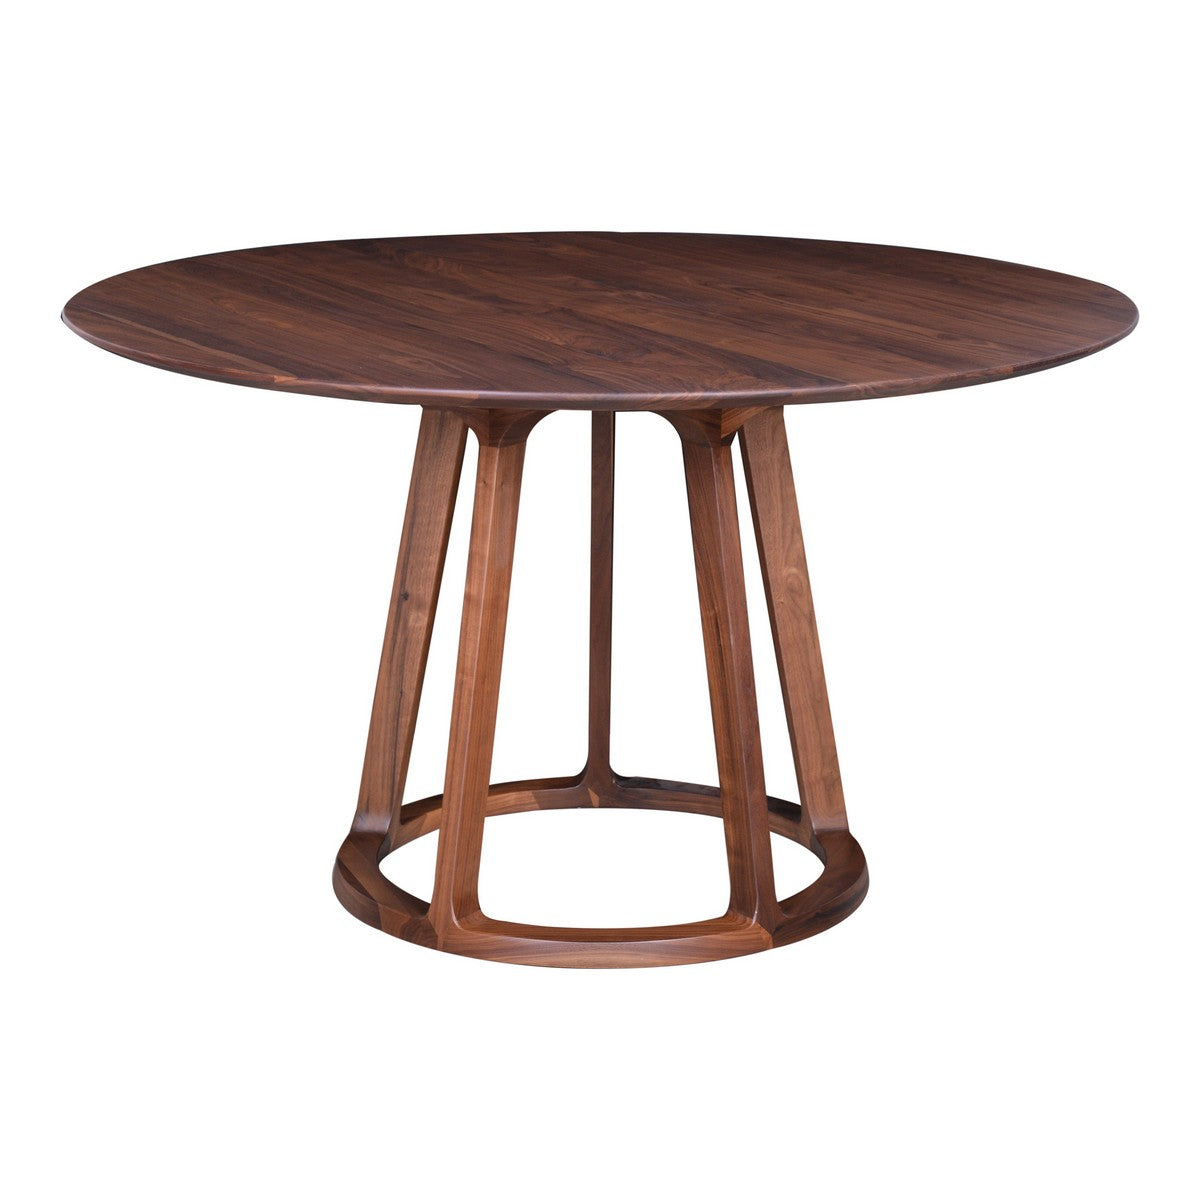 Moe's Home Collection Aldo Round Dining Table Walnut - CB-1027-03 - Moe's Home Collection - Dining Tables - Minimal And Modern - 1